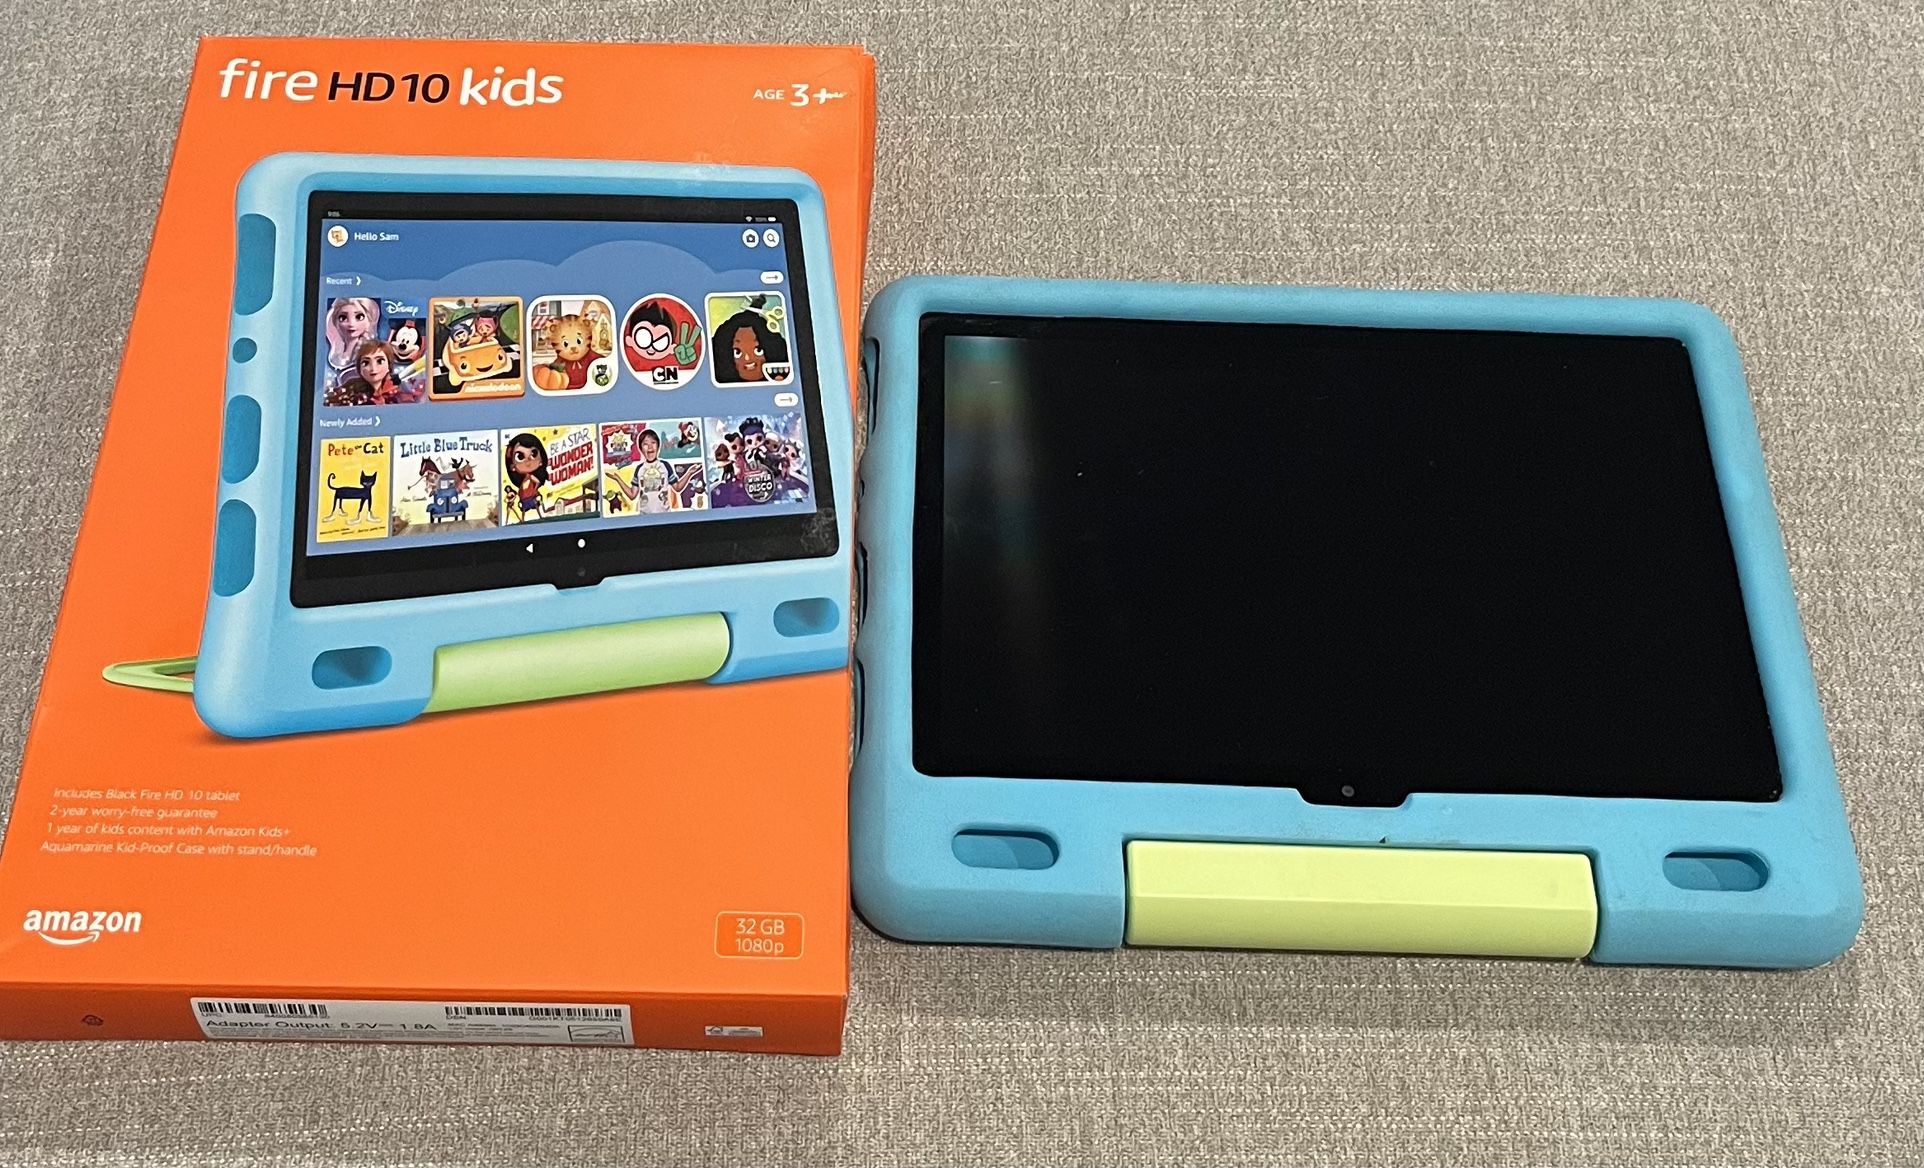 Fire HD 10 Kids tablet, ages 3-7. Top-selling 10 kids